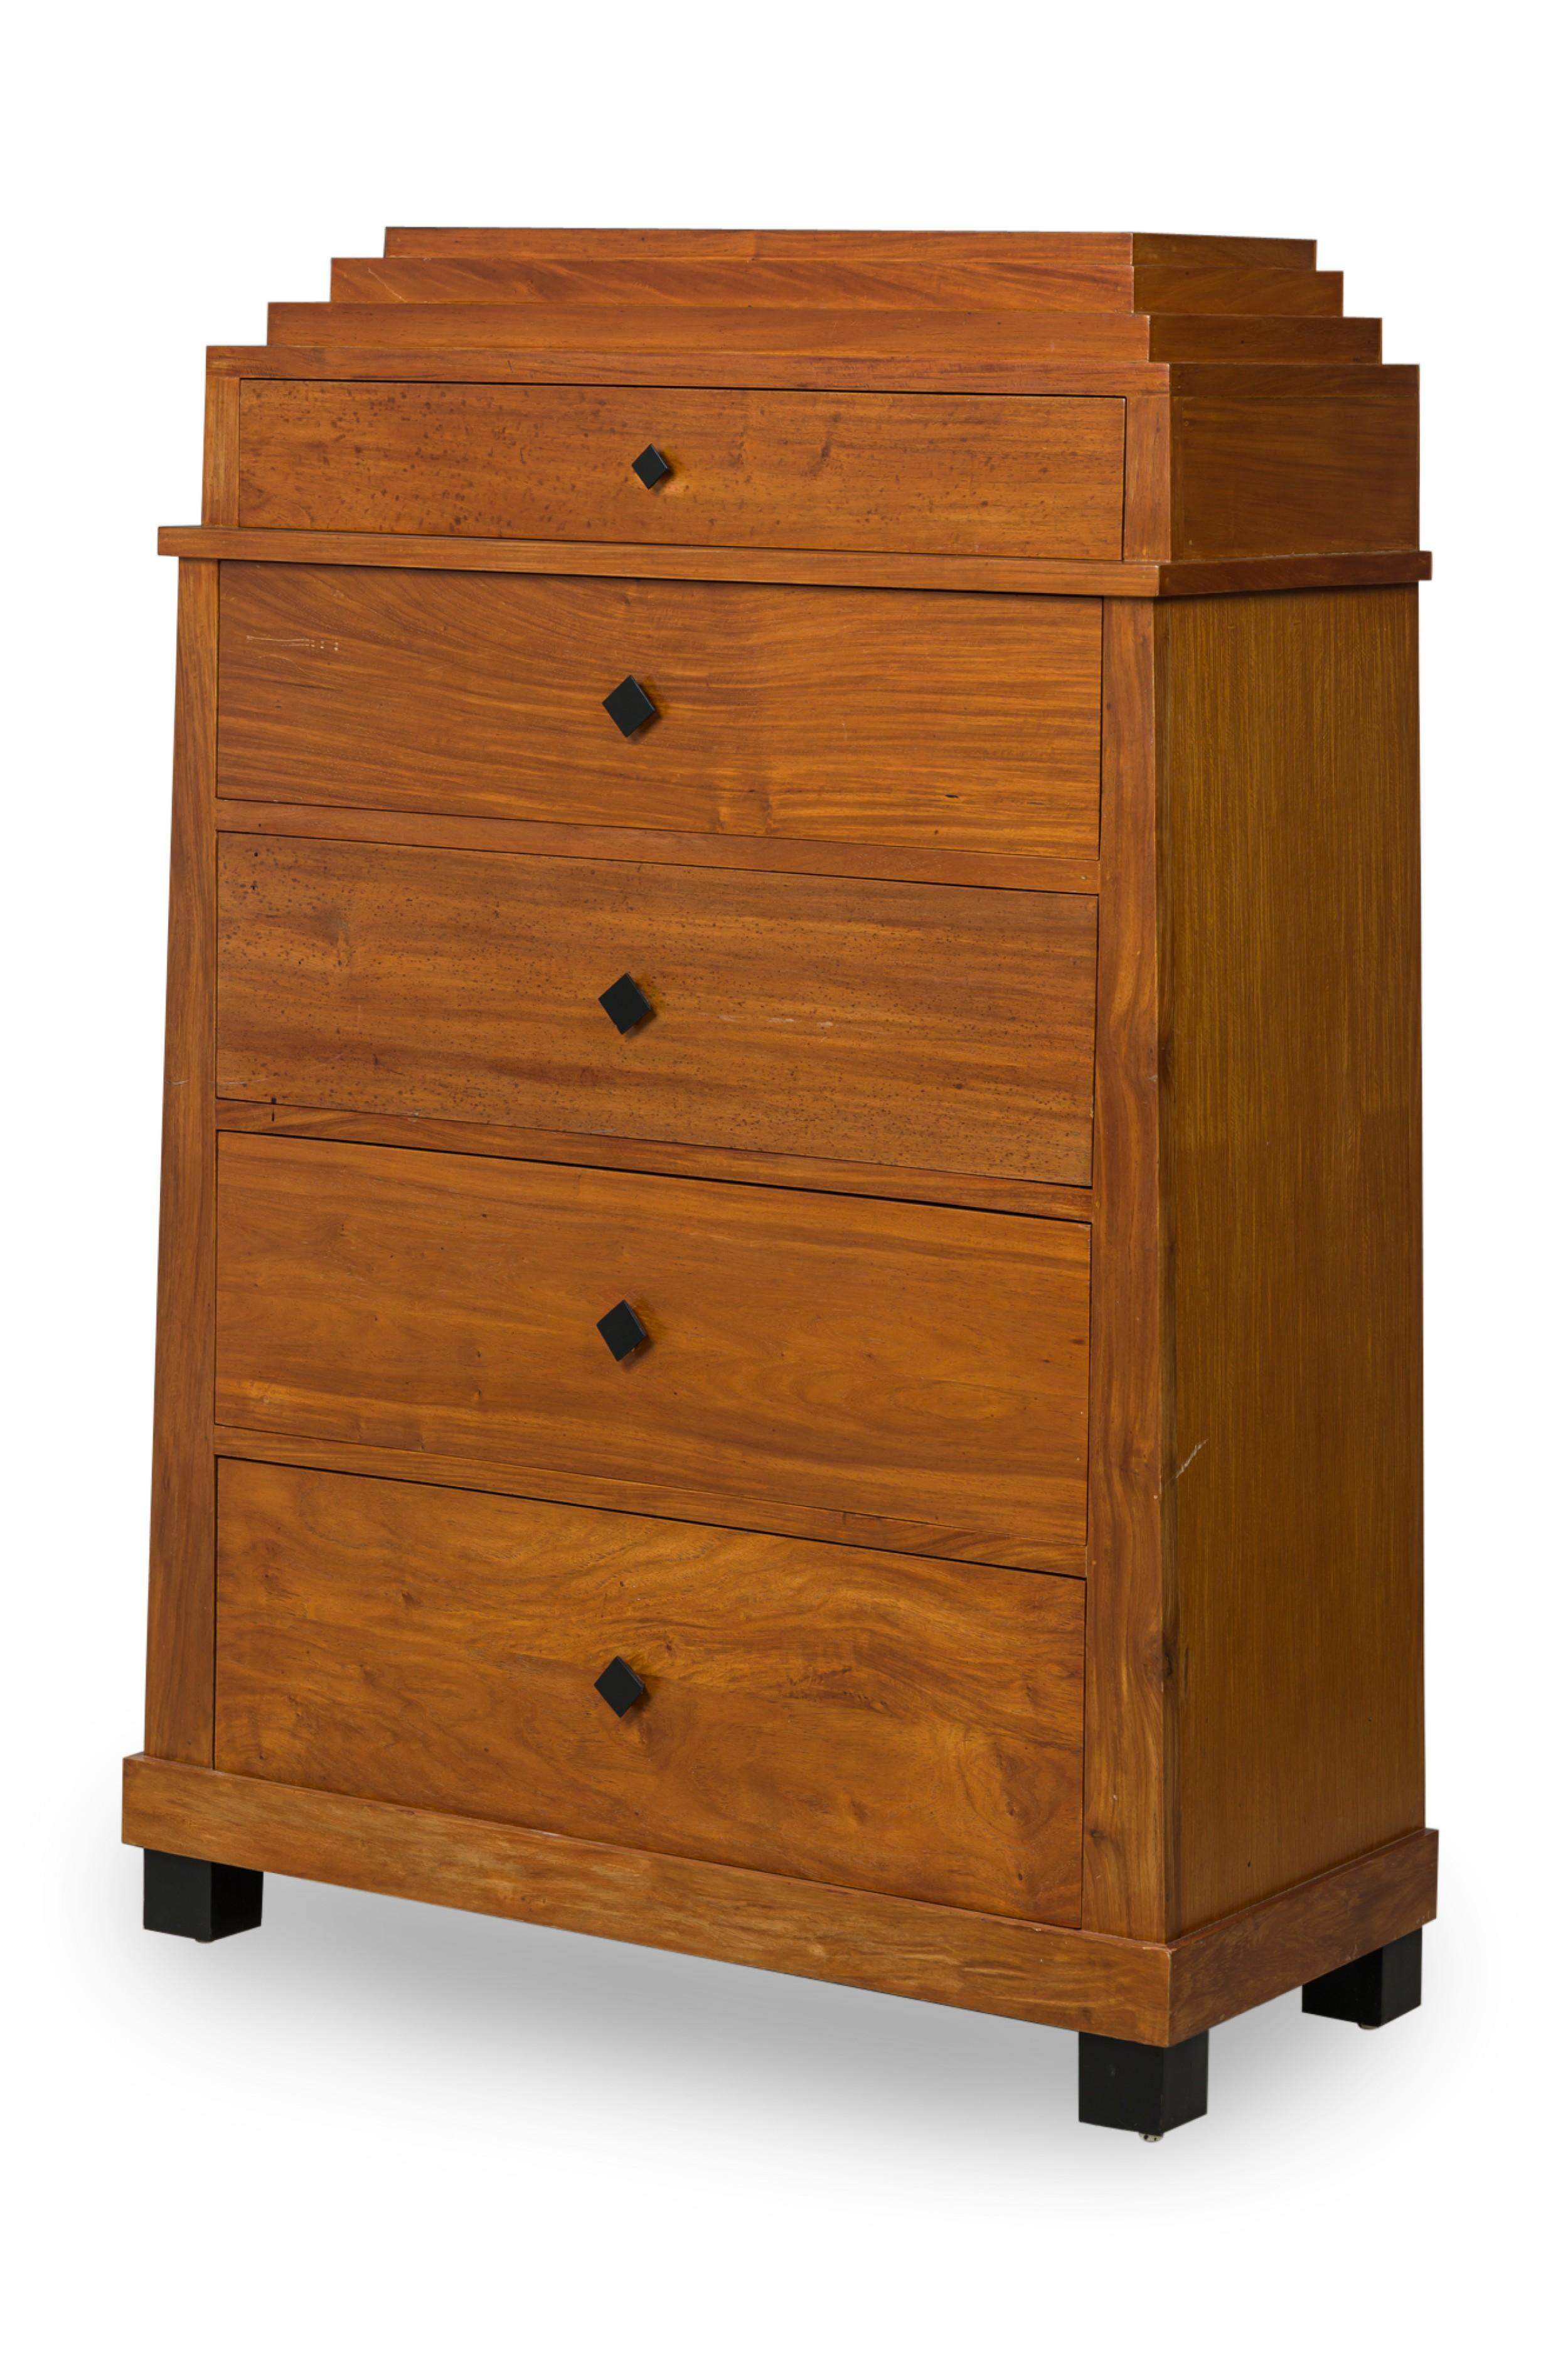 Biedermeier Style 5-drawer wood chest featuring a decorative stepped top with a narrow drawer followed by 4 evenly spaced larger drawers with ebonized diamond shaped pulls and 4 tapered block feet.
 

 Slight wear on corners
